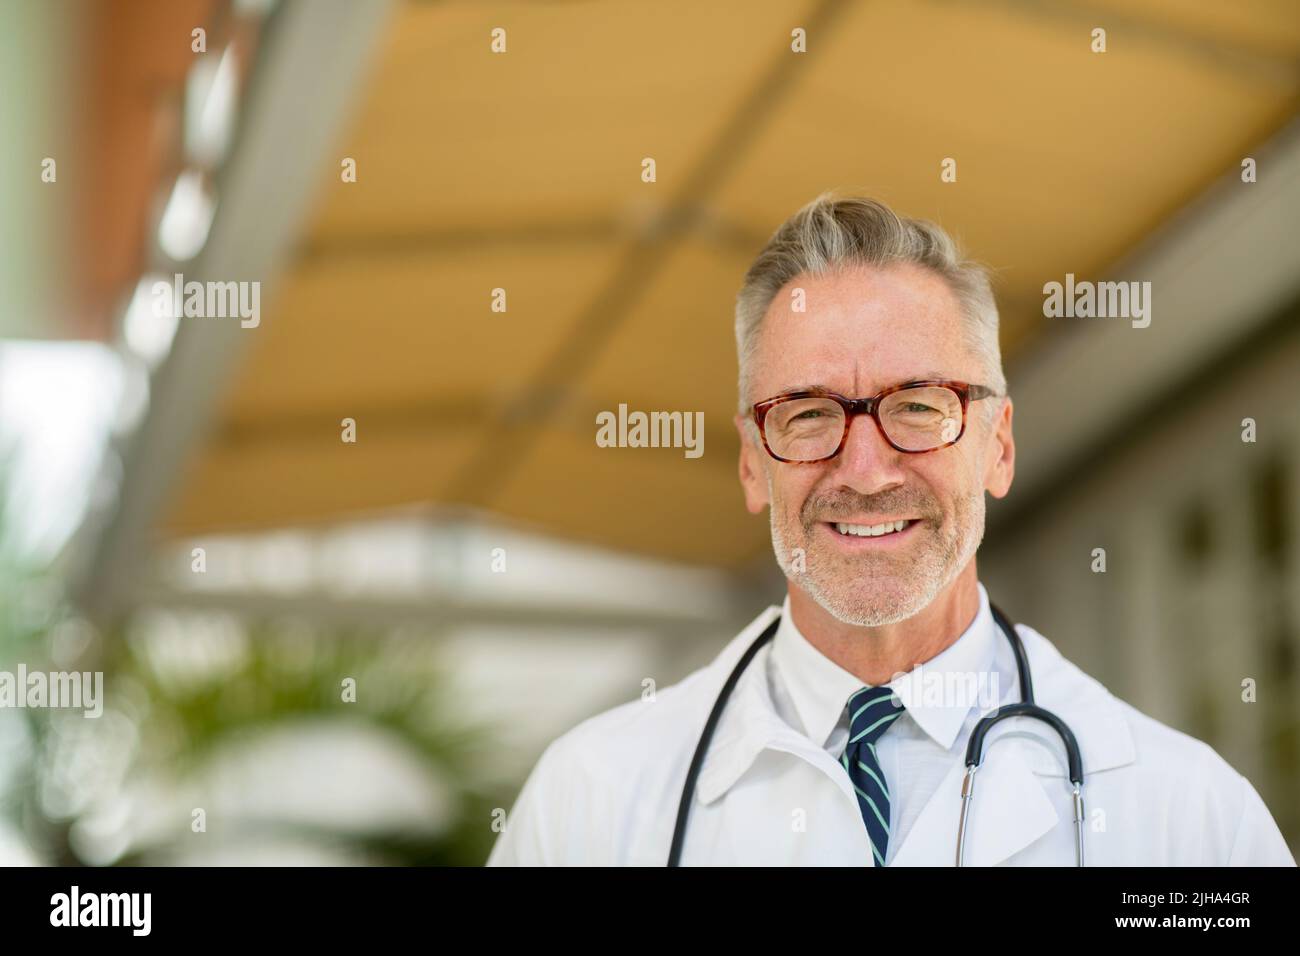 Mature healthcare provider at his medical office. Stock Photo